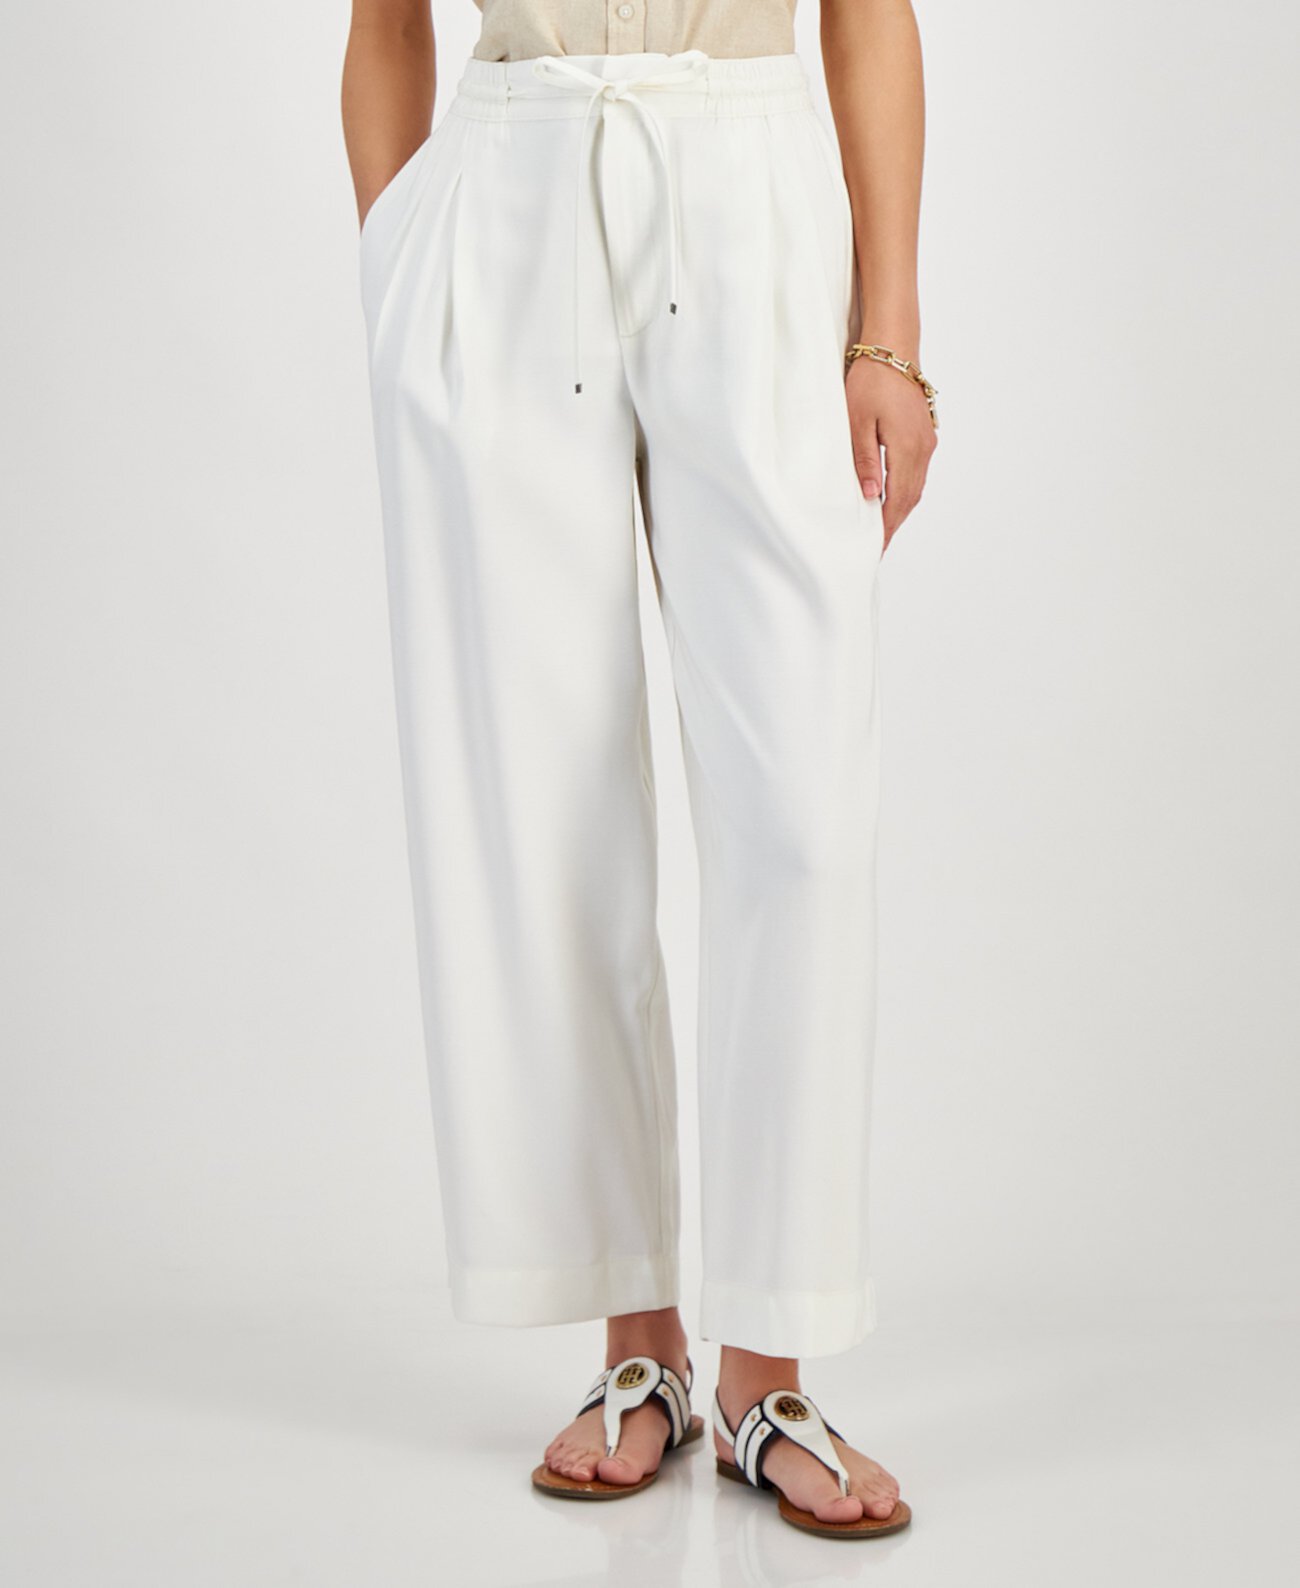 Women's Belted Pleated-Front Ankle Pants Tommy Hilfiger